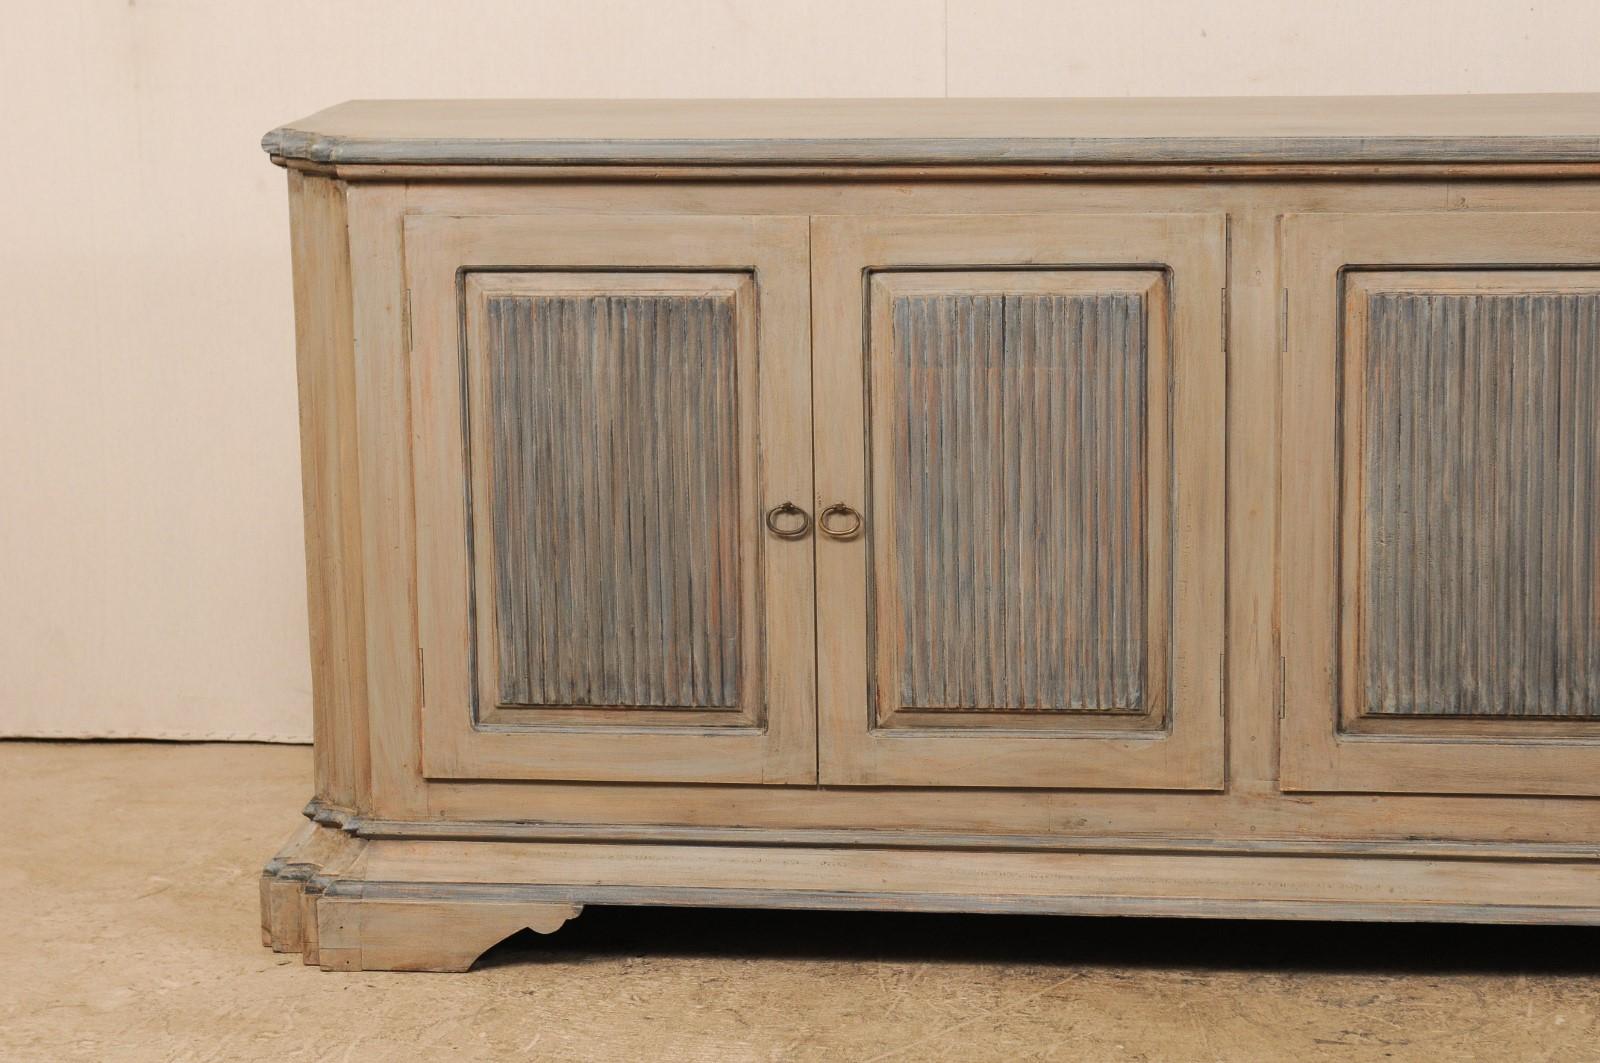 American Vintage Italian Style Painted Wood Buffet Cabinet with Reeded Doors